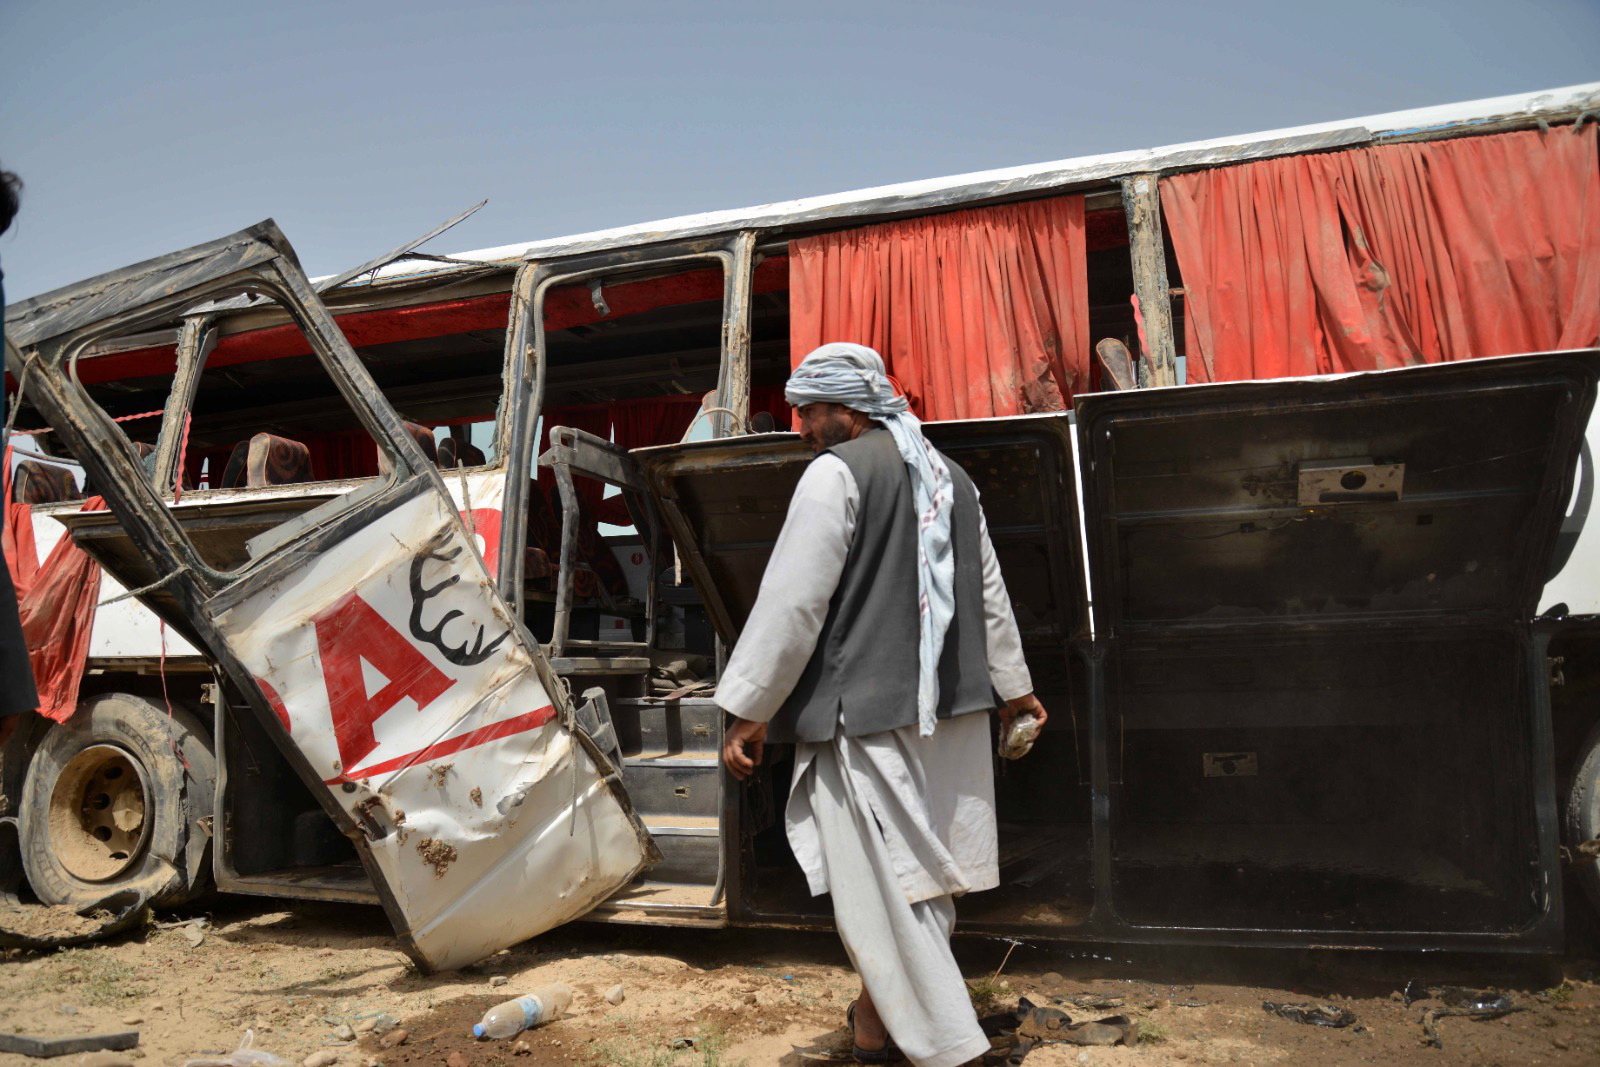 epa10594477 Afghans gather at the scene after a passenger bus overturned in Daman district, Kandahar, Afghanistan, 27 April 2023. At least six people died, and 18 others were injured when the bus overturned on the Kandahar-Kabul highway, Haji Zaid, the spokesman of Kandahar governor of the Taliban government, said.  EPA/STRINGER 14469